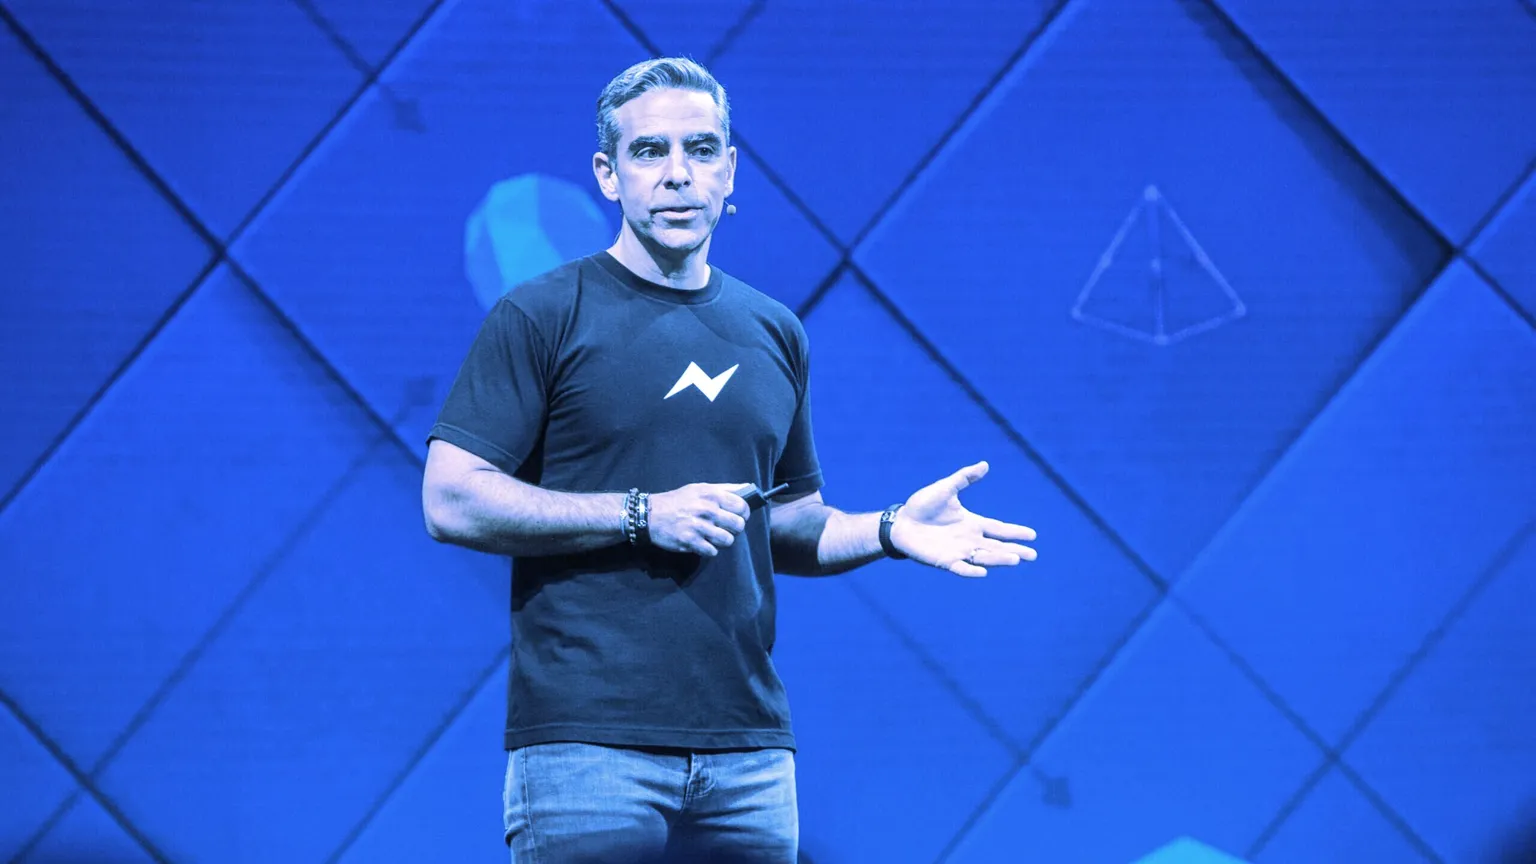 David Marcus, now Head of Novi crypto wallet at Facebook, speaks in 2017 when he was in charge of Facebook Messenger. Photo: Anthony Quintano on Flickr (CC BY 2.0)